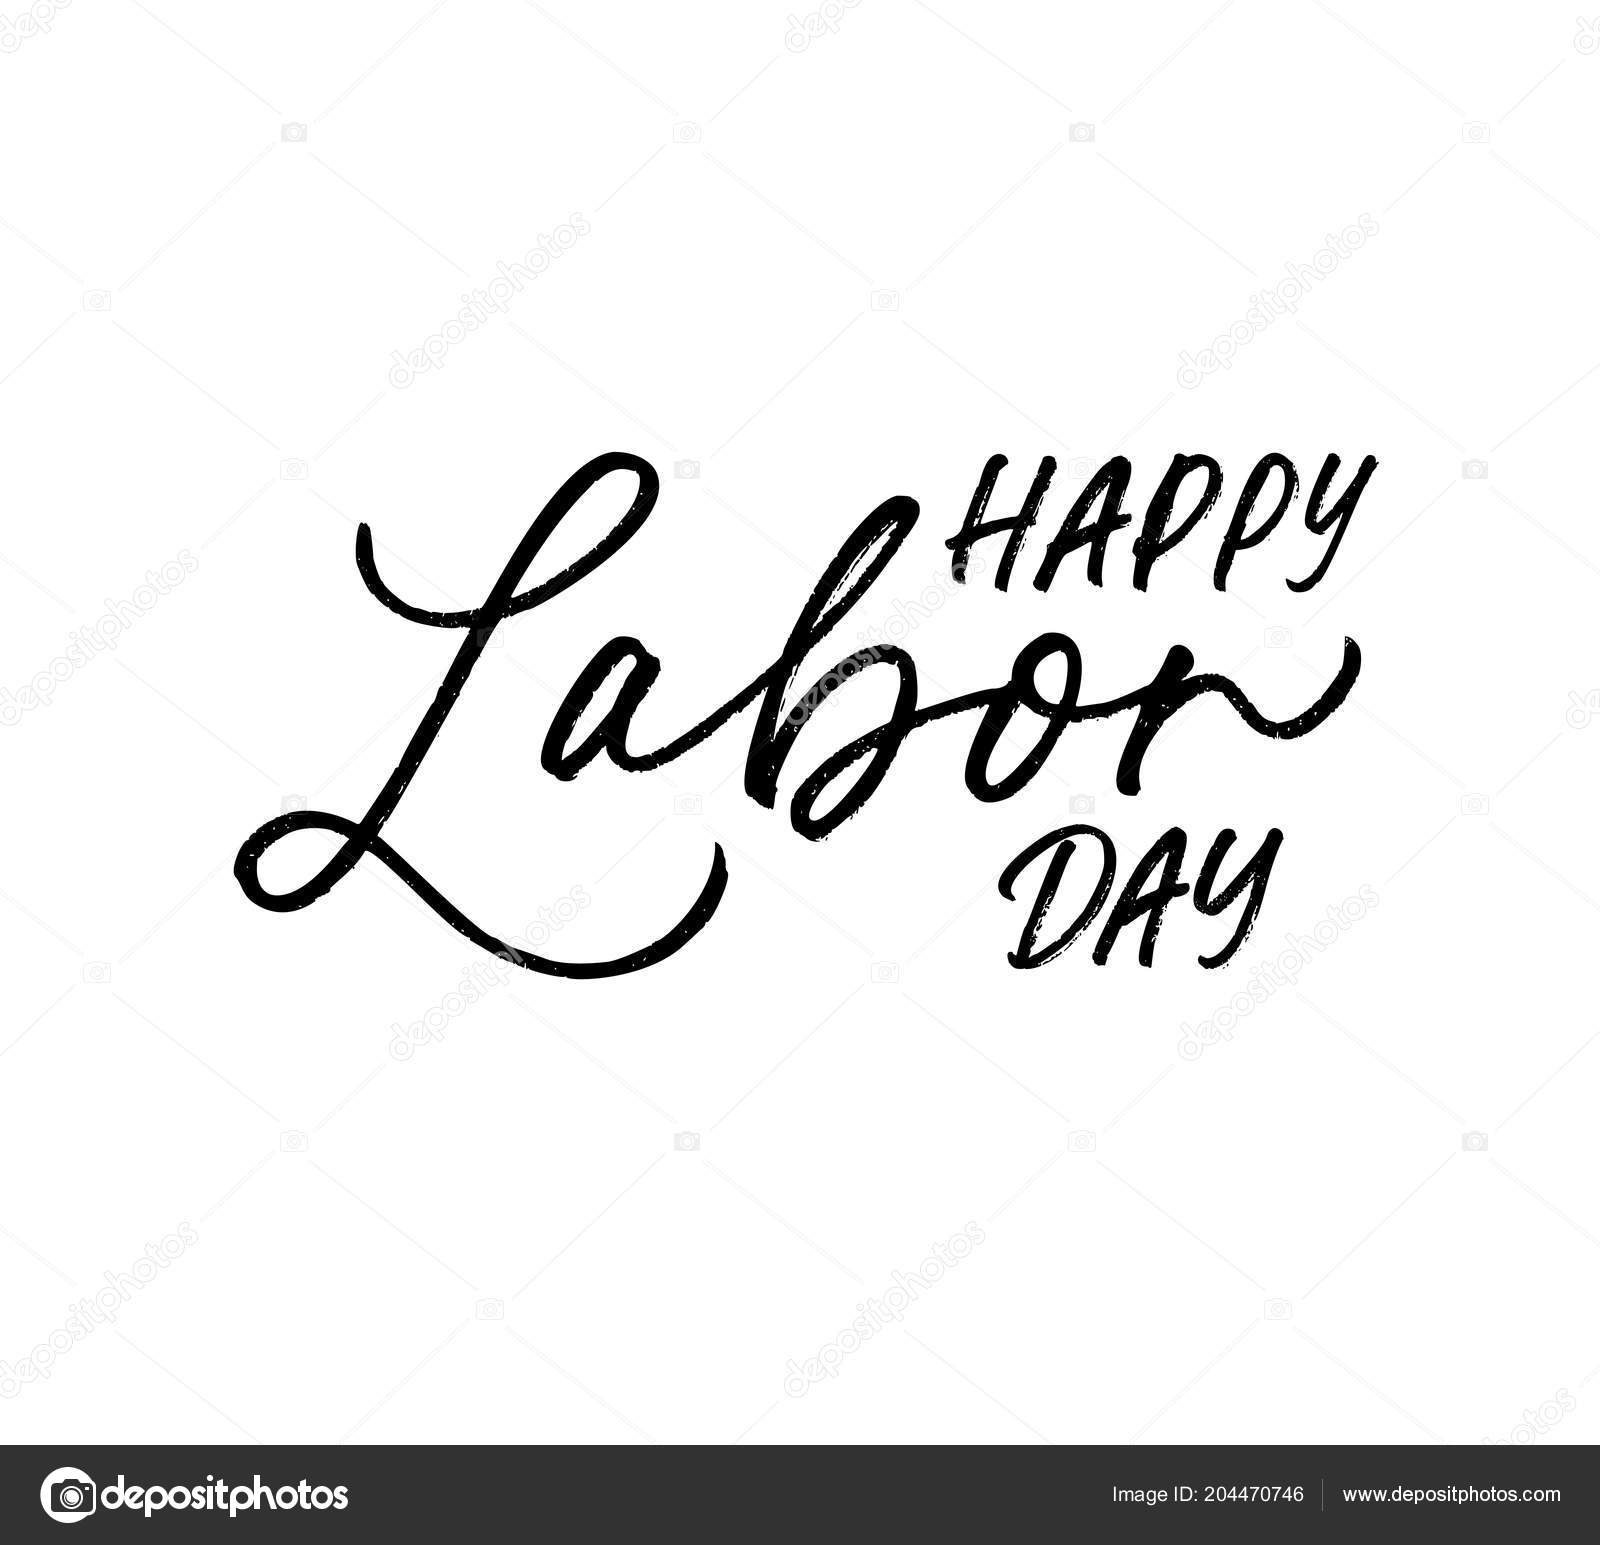 Happy Labor day phrase. Holiday lettering. Ink illustration. Modern brush calligraphy. Isolated on white background.